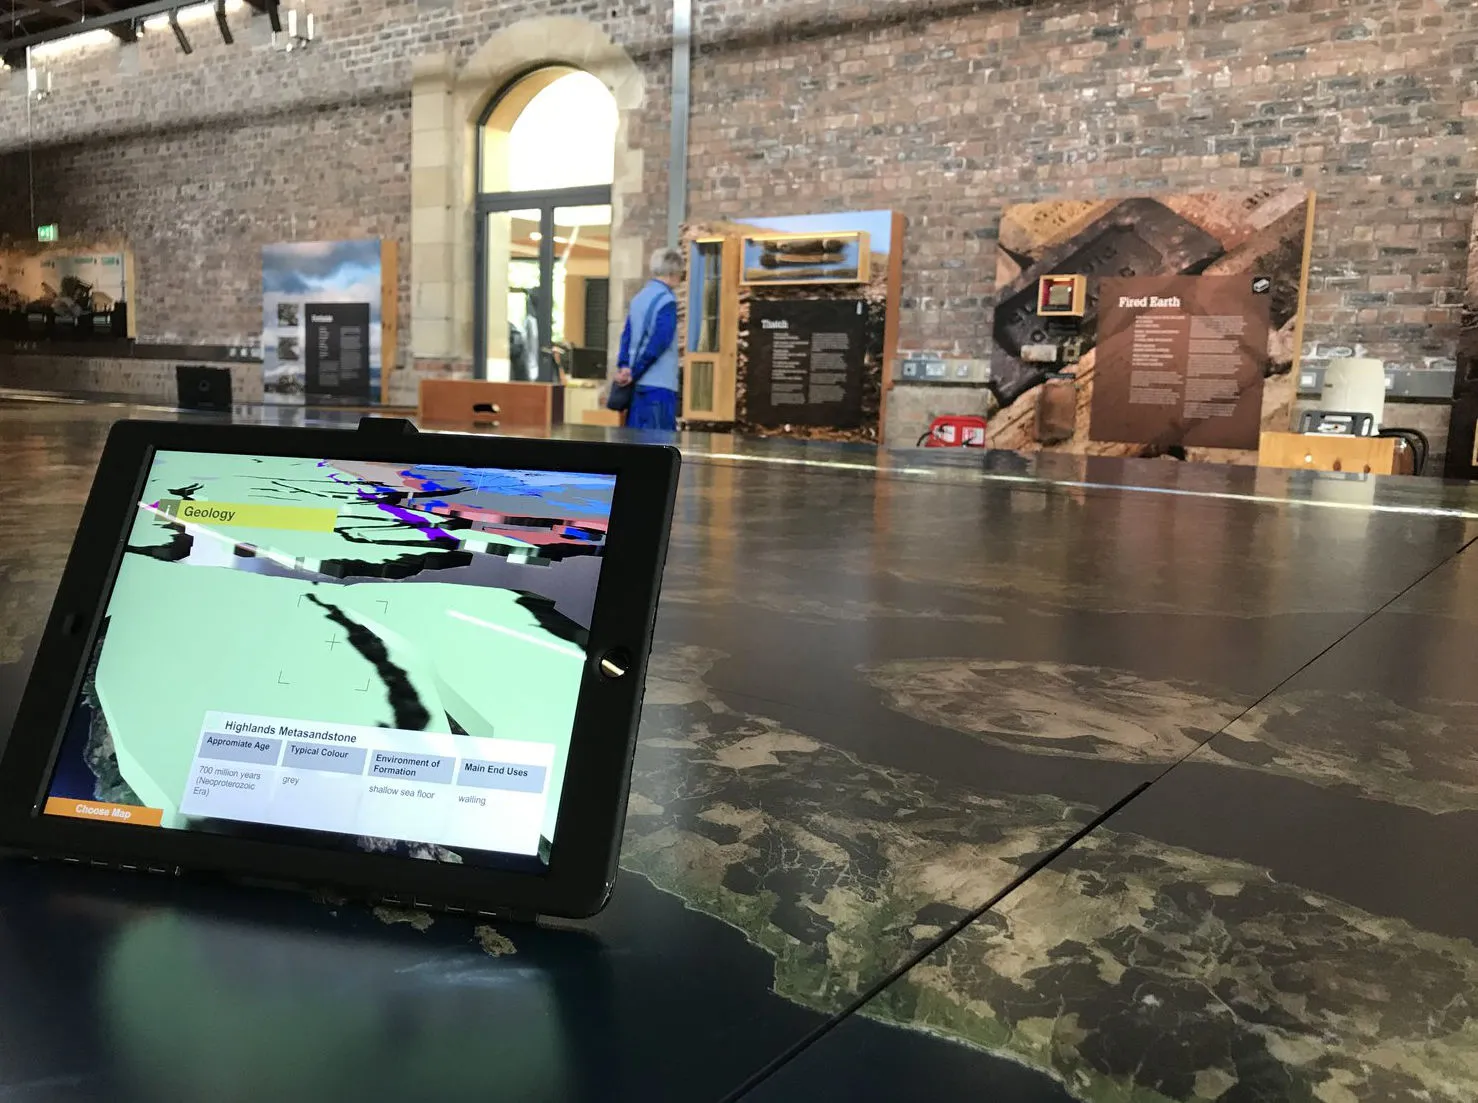 Engine Shed main room with table and iPad